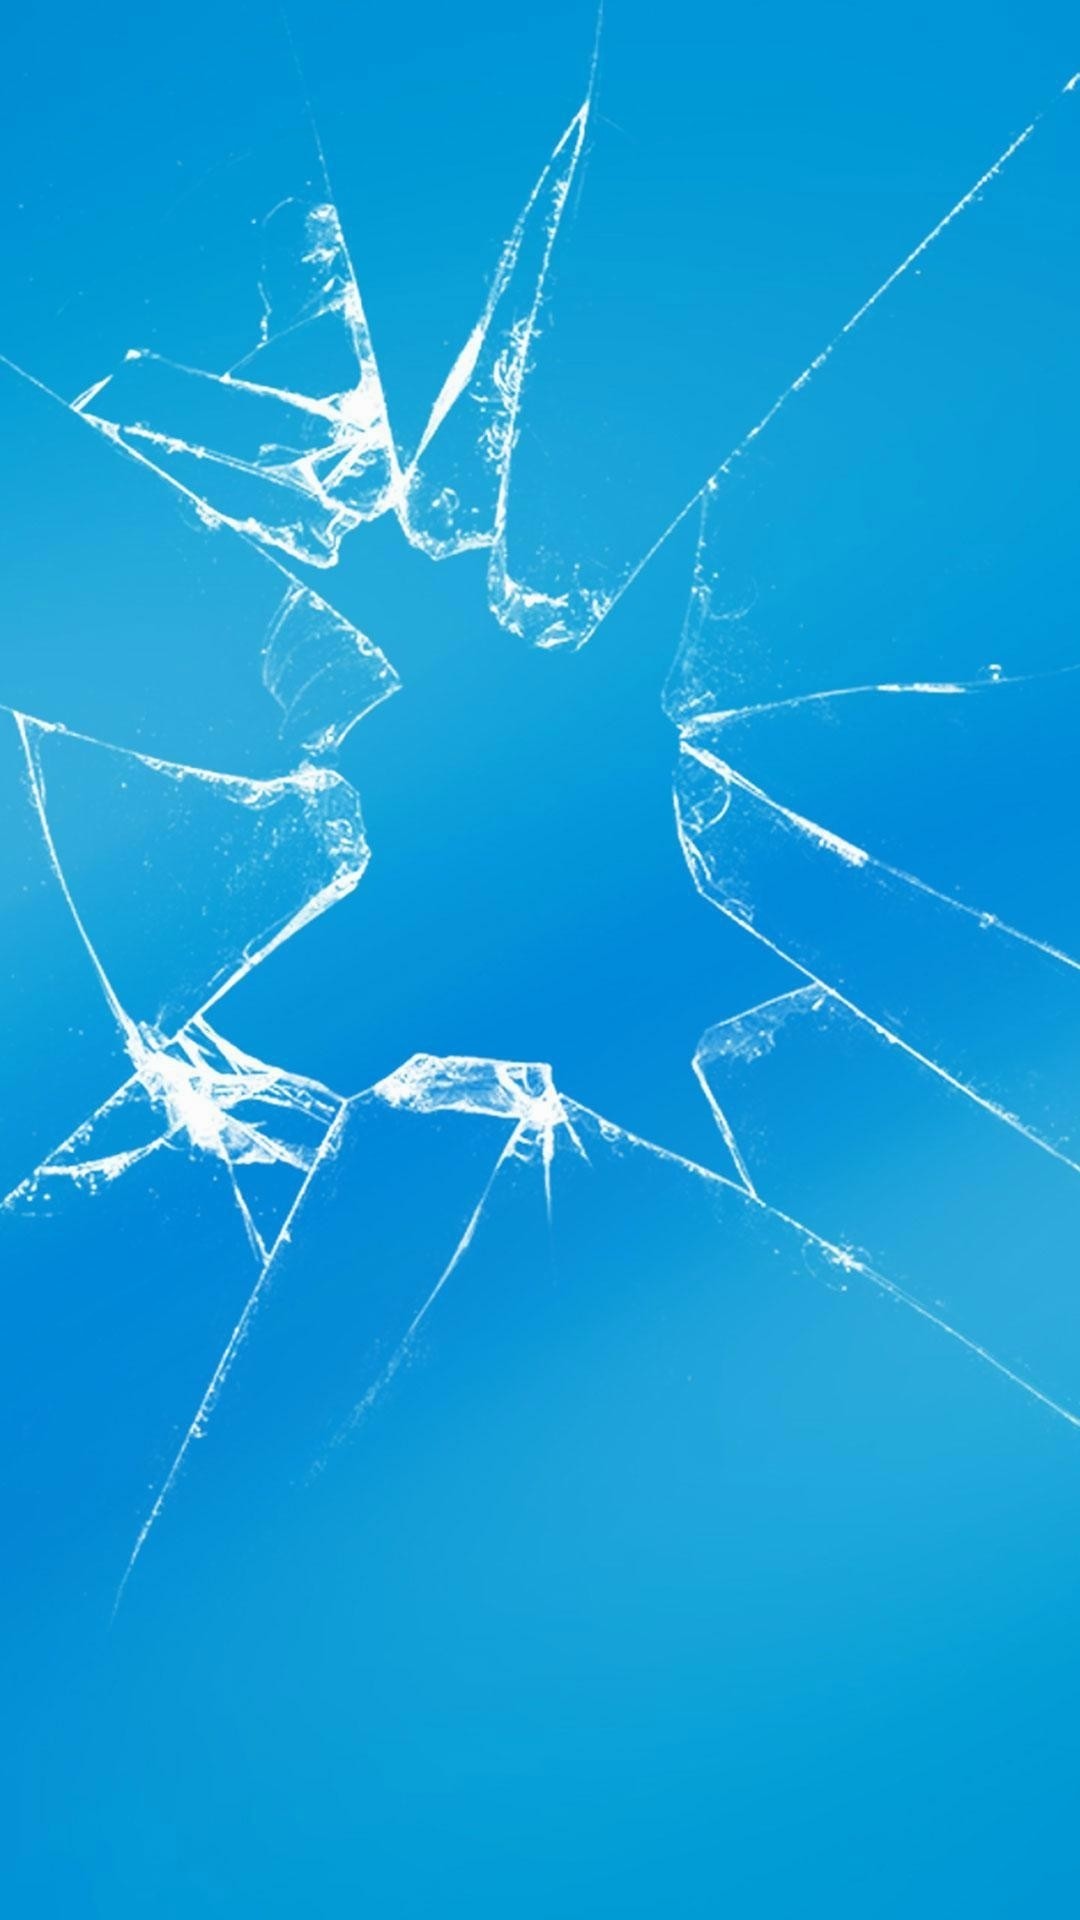 Cracked Screen wallpaper for iPhone